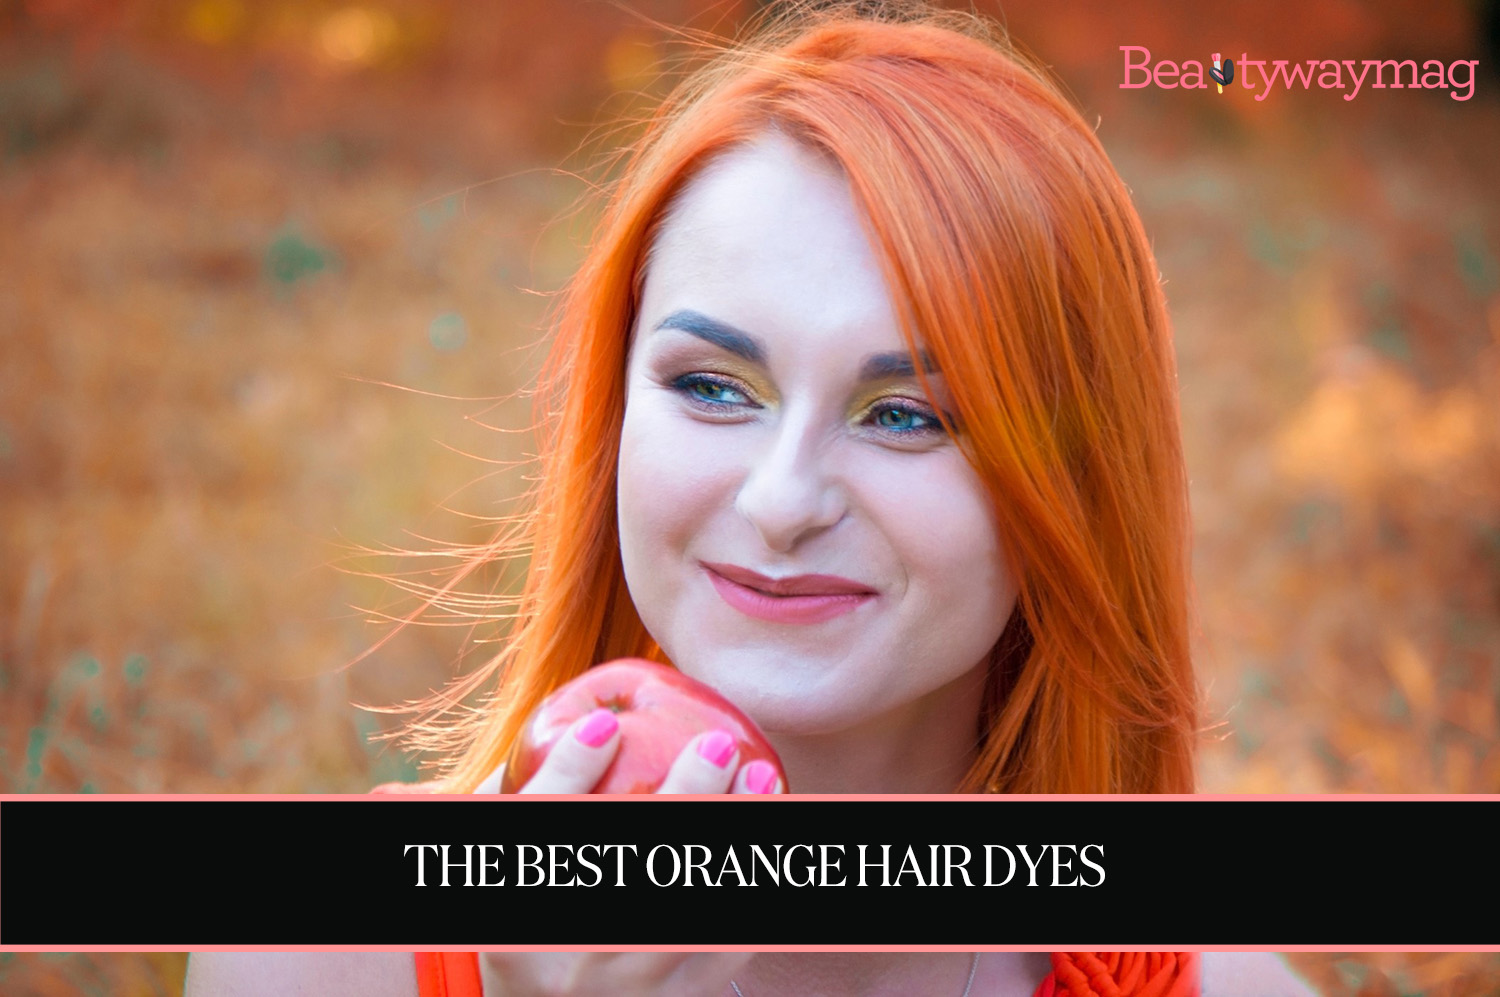 1. How to Mix Blue and Orange Hair Dye for a Unique Look - wide 9